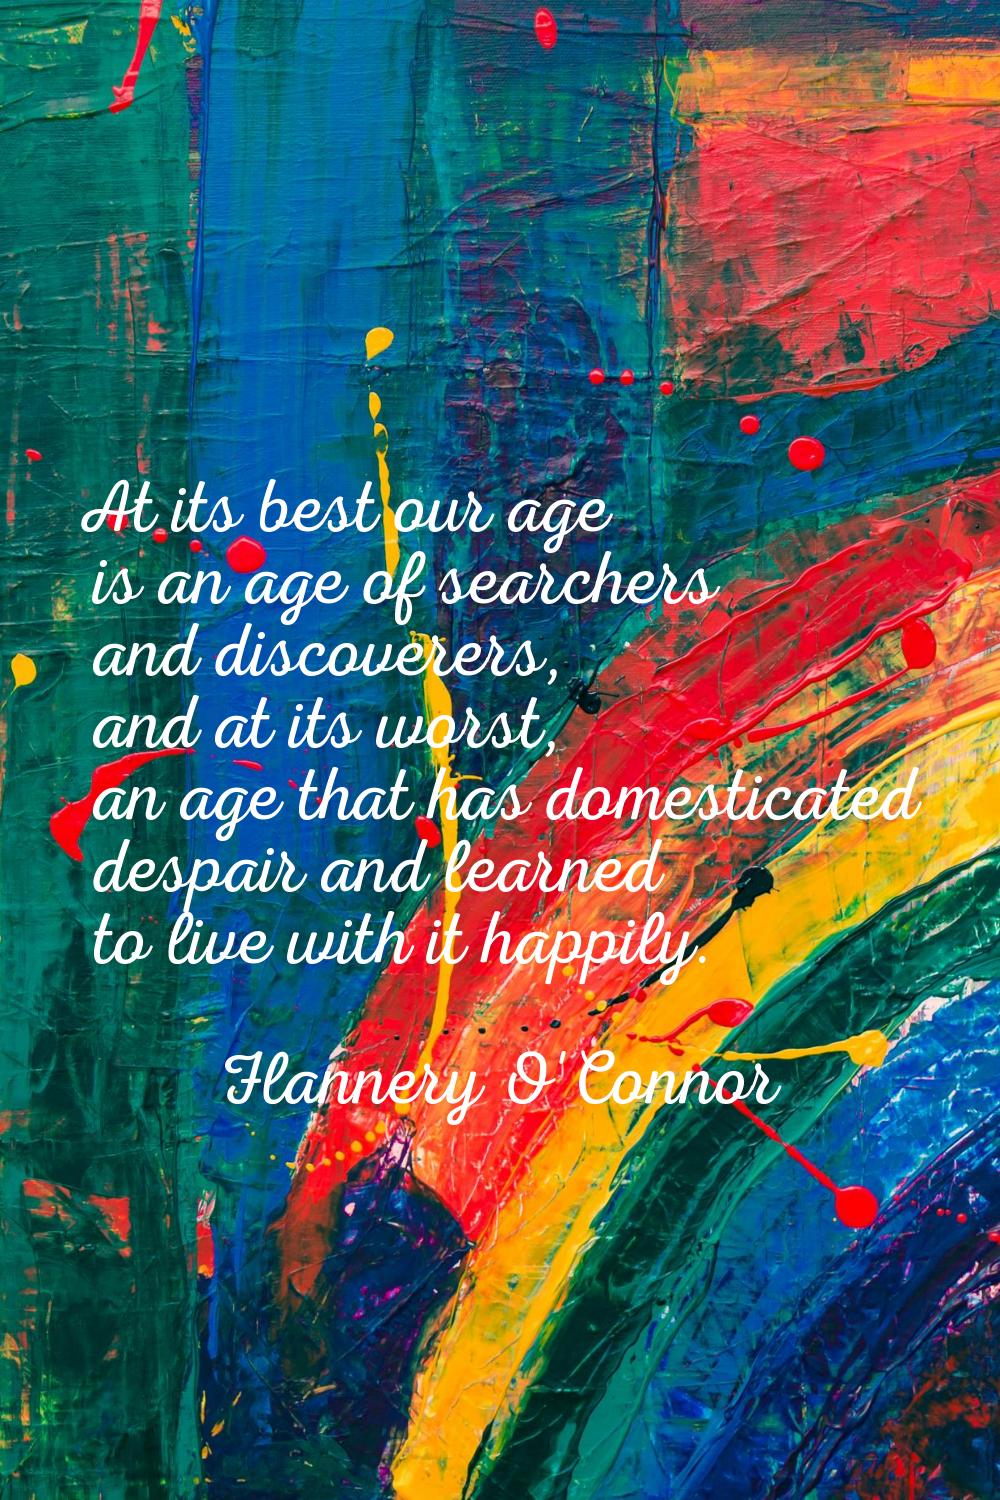 At its best our age is an age of searchers and discoverers, and at its worst, an age that has domes